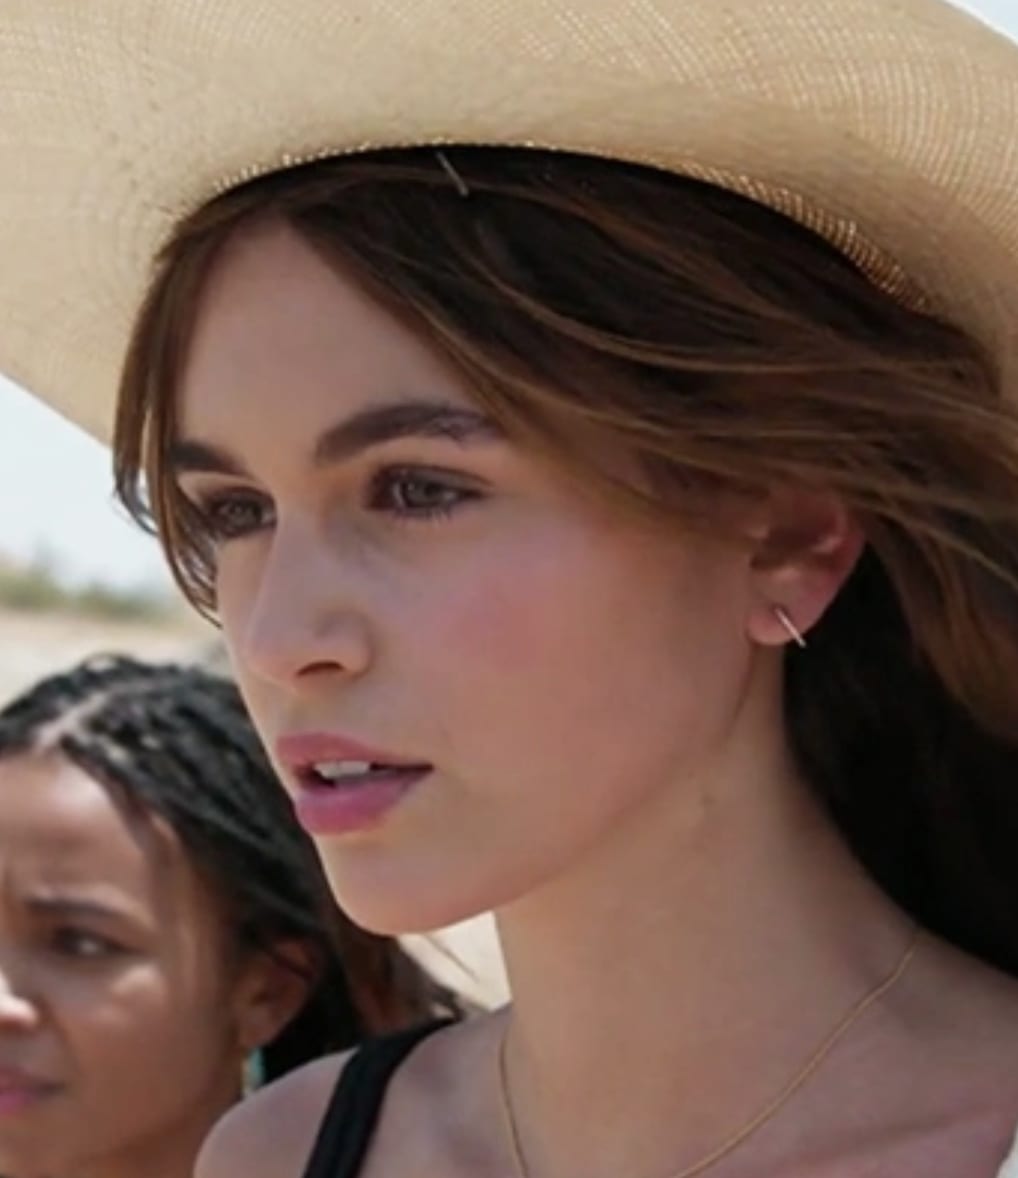 Watch The Trailer To American Horror Stories With Kaia Gerber - Grazia